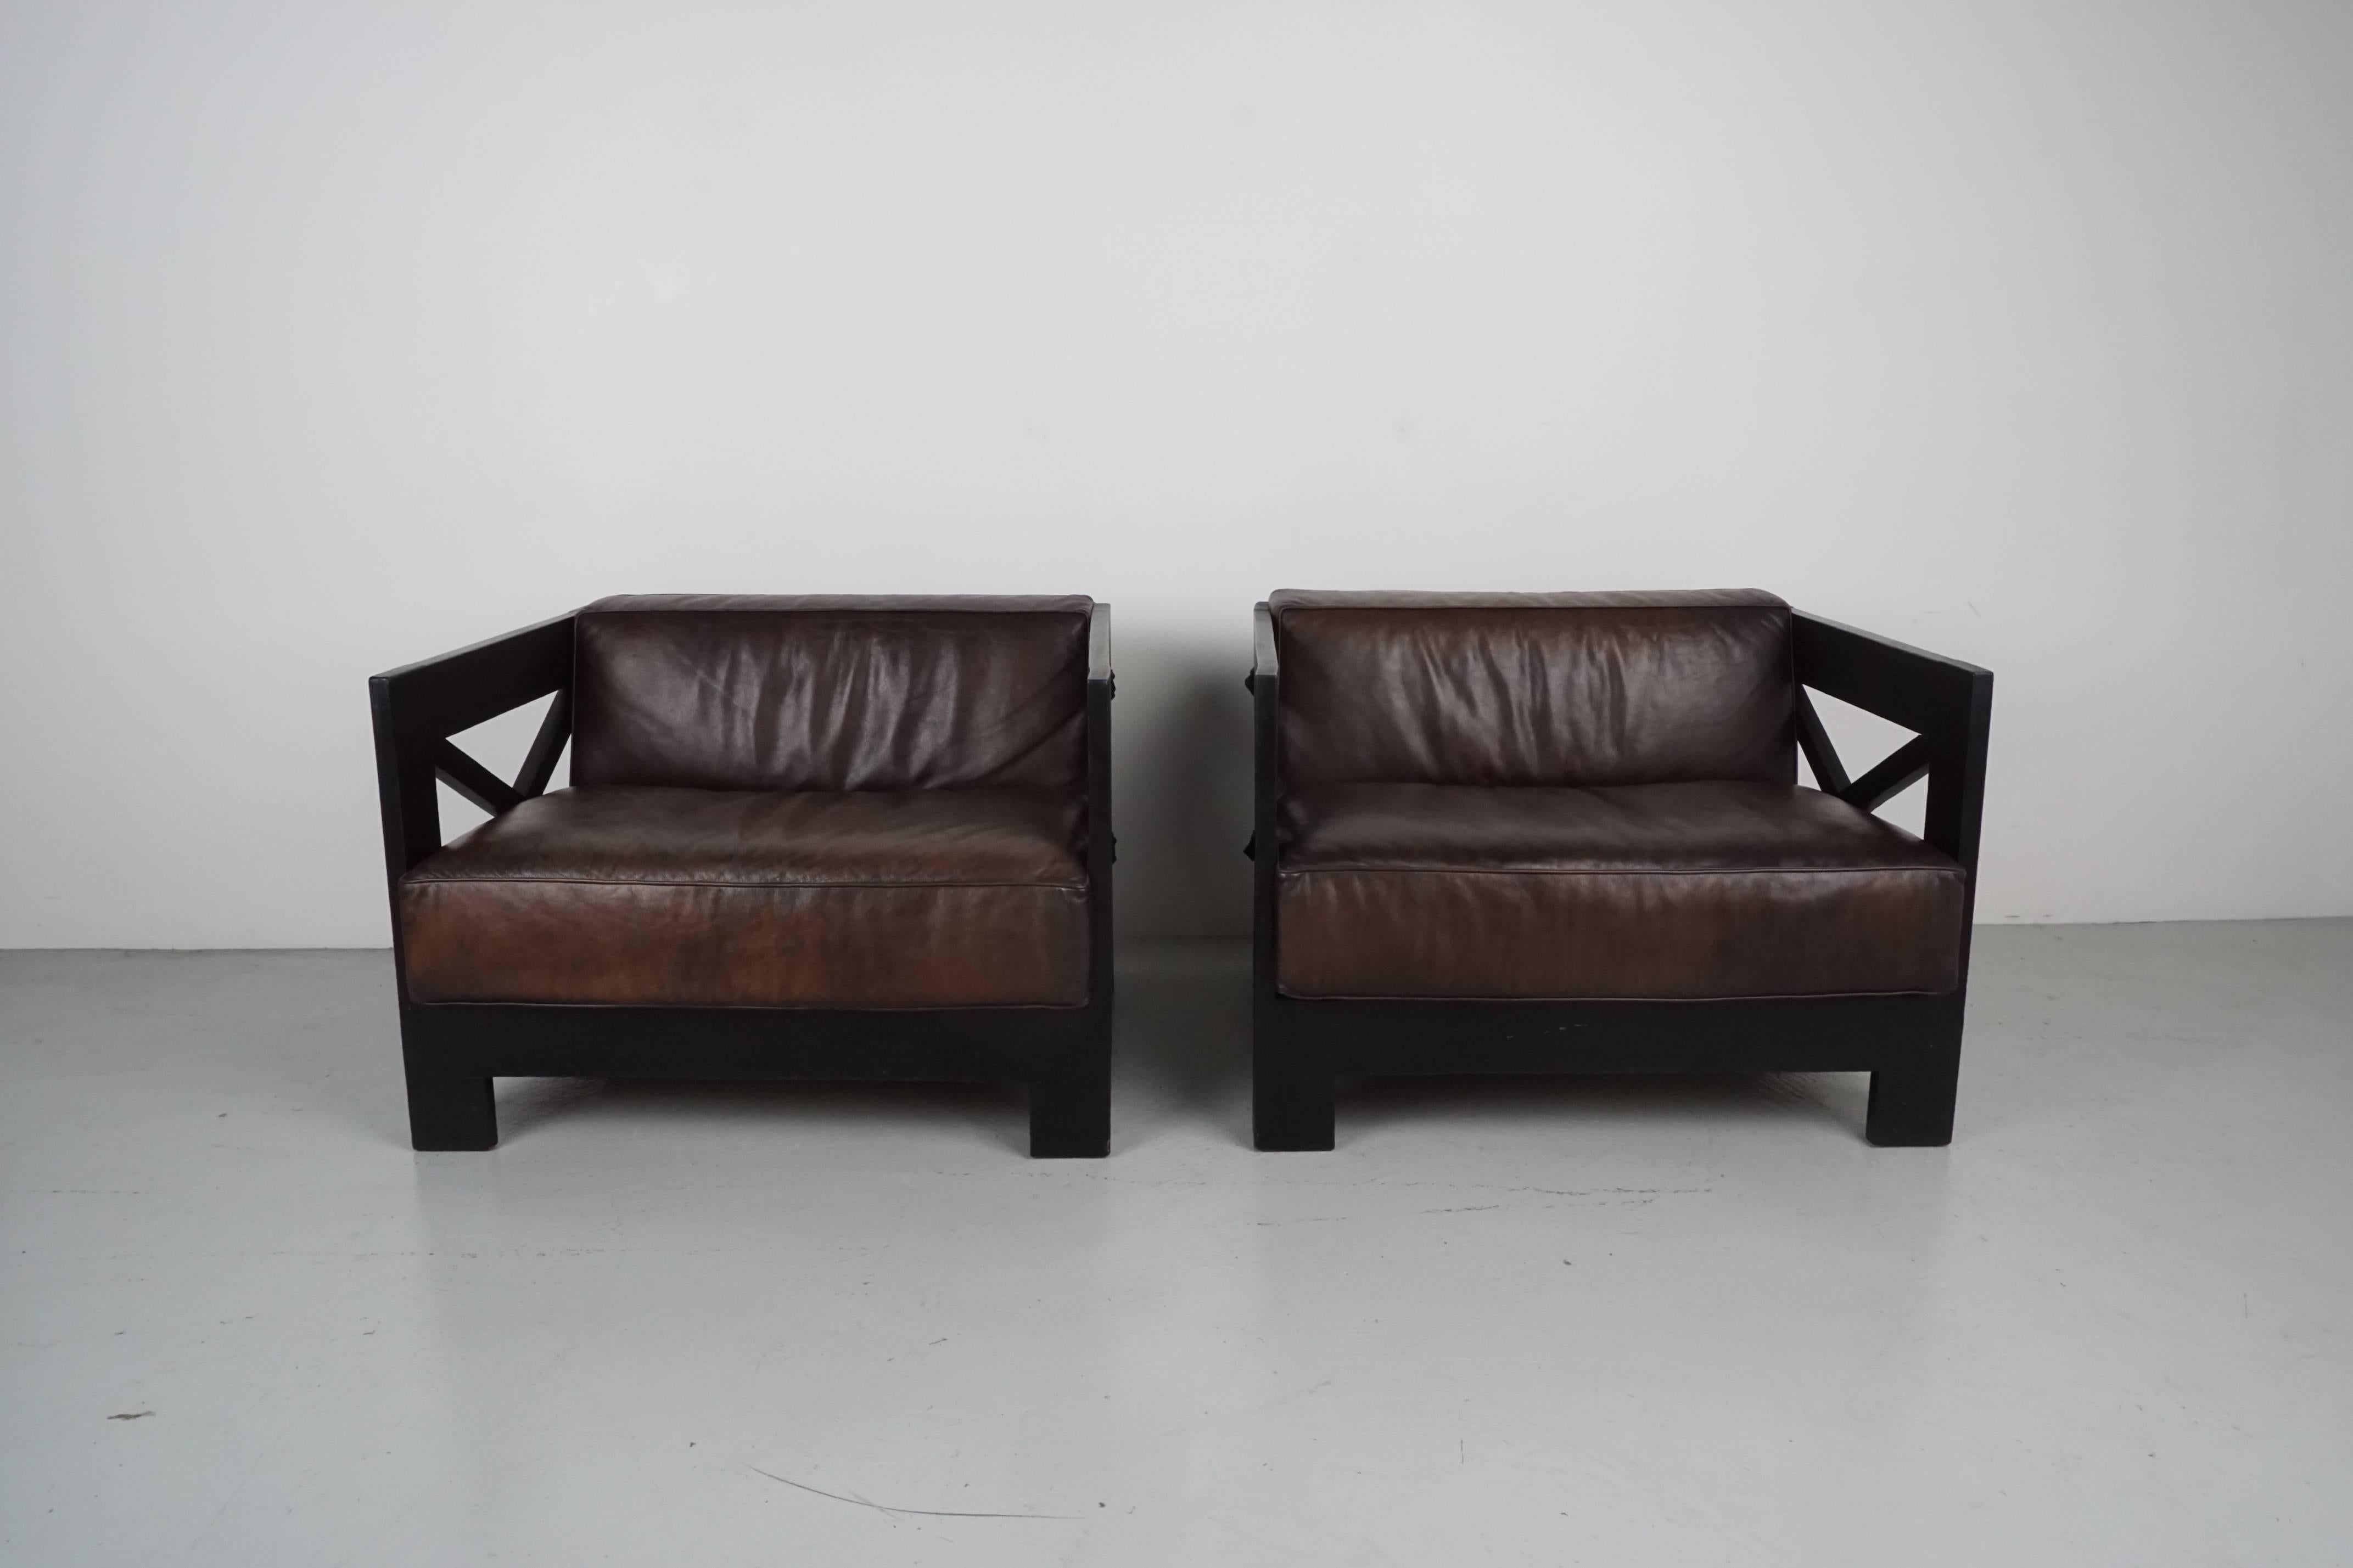 Pair of Jacques Adnet leather frame chairs. Black leather wrapped frames with espresso brown leather cushions. 